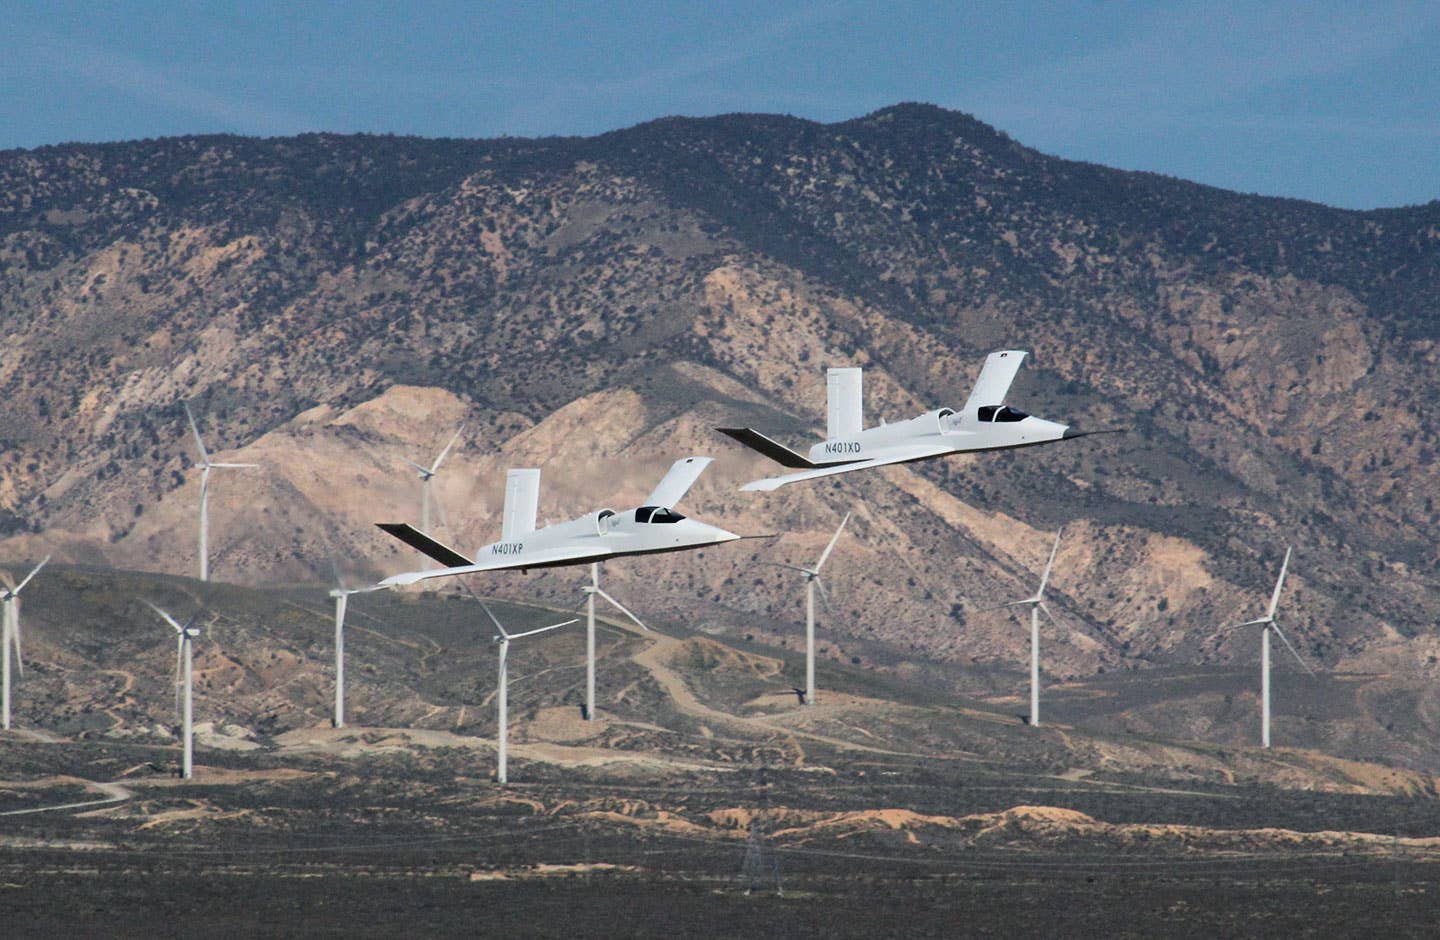 Model 401s flying together over Mojave. (Scaled Composites)